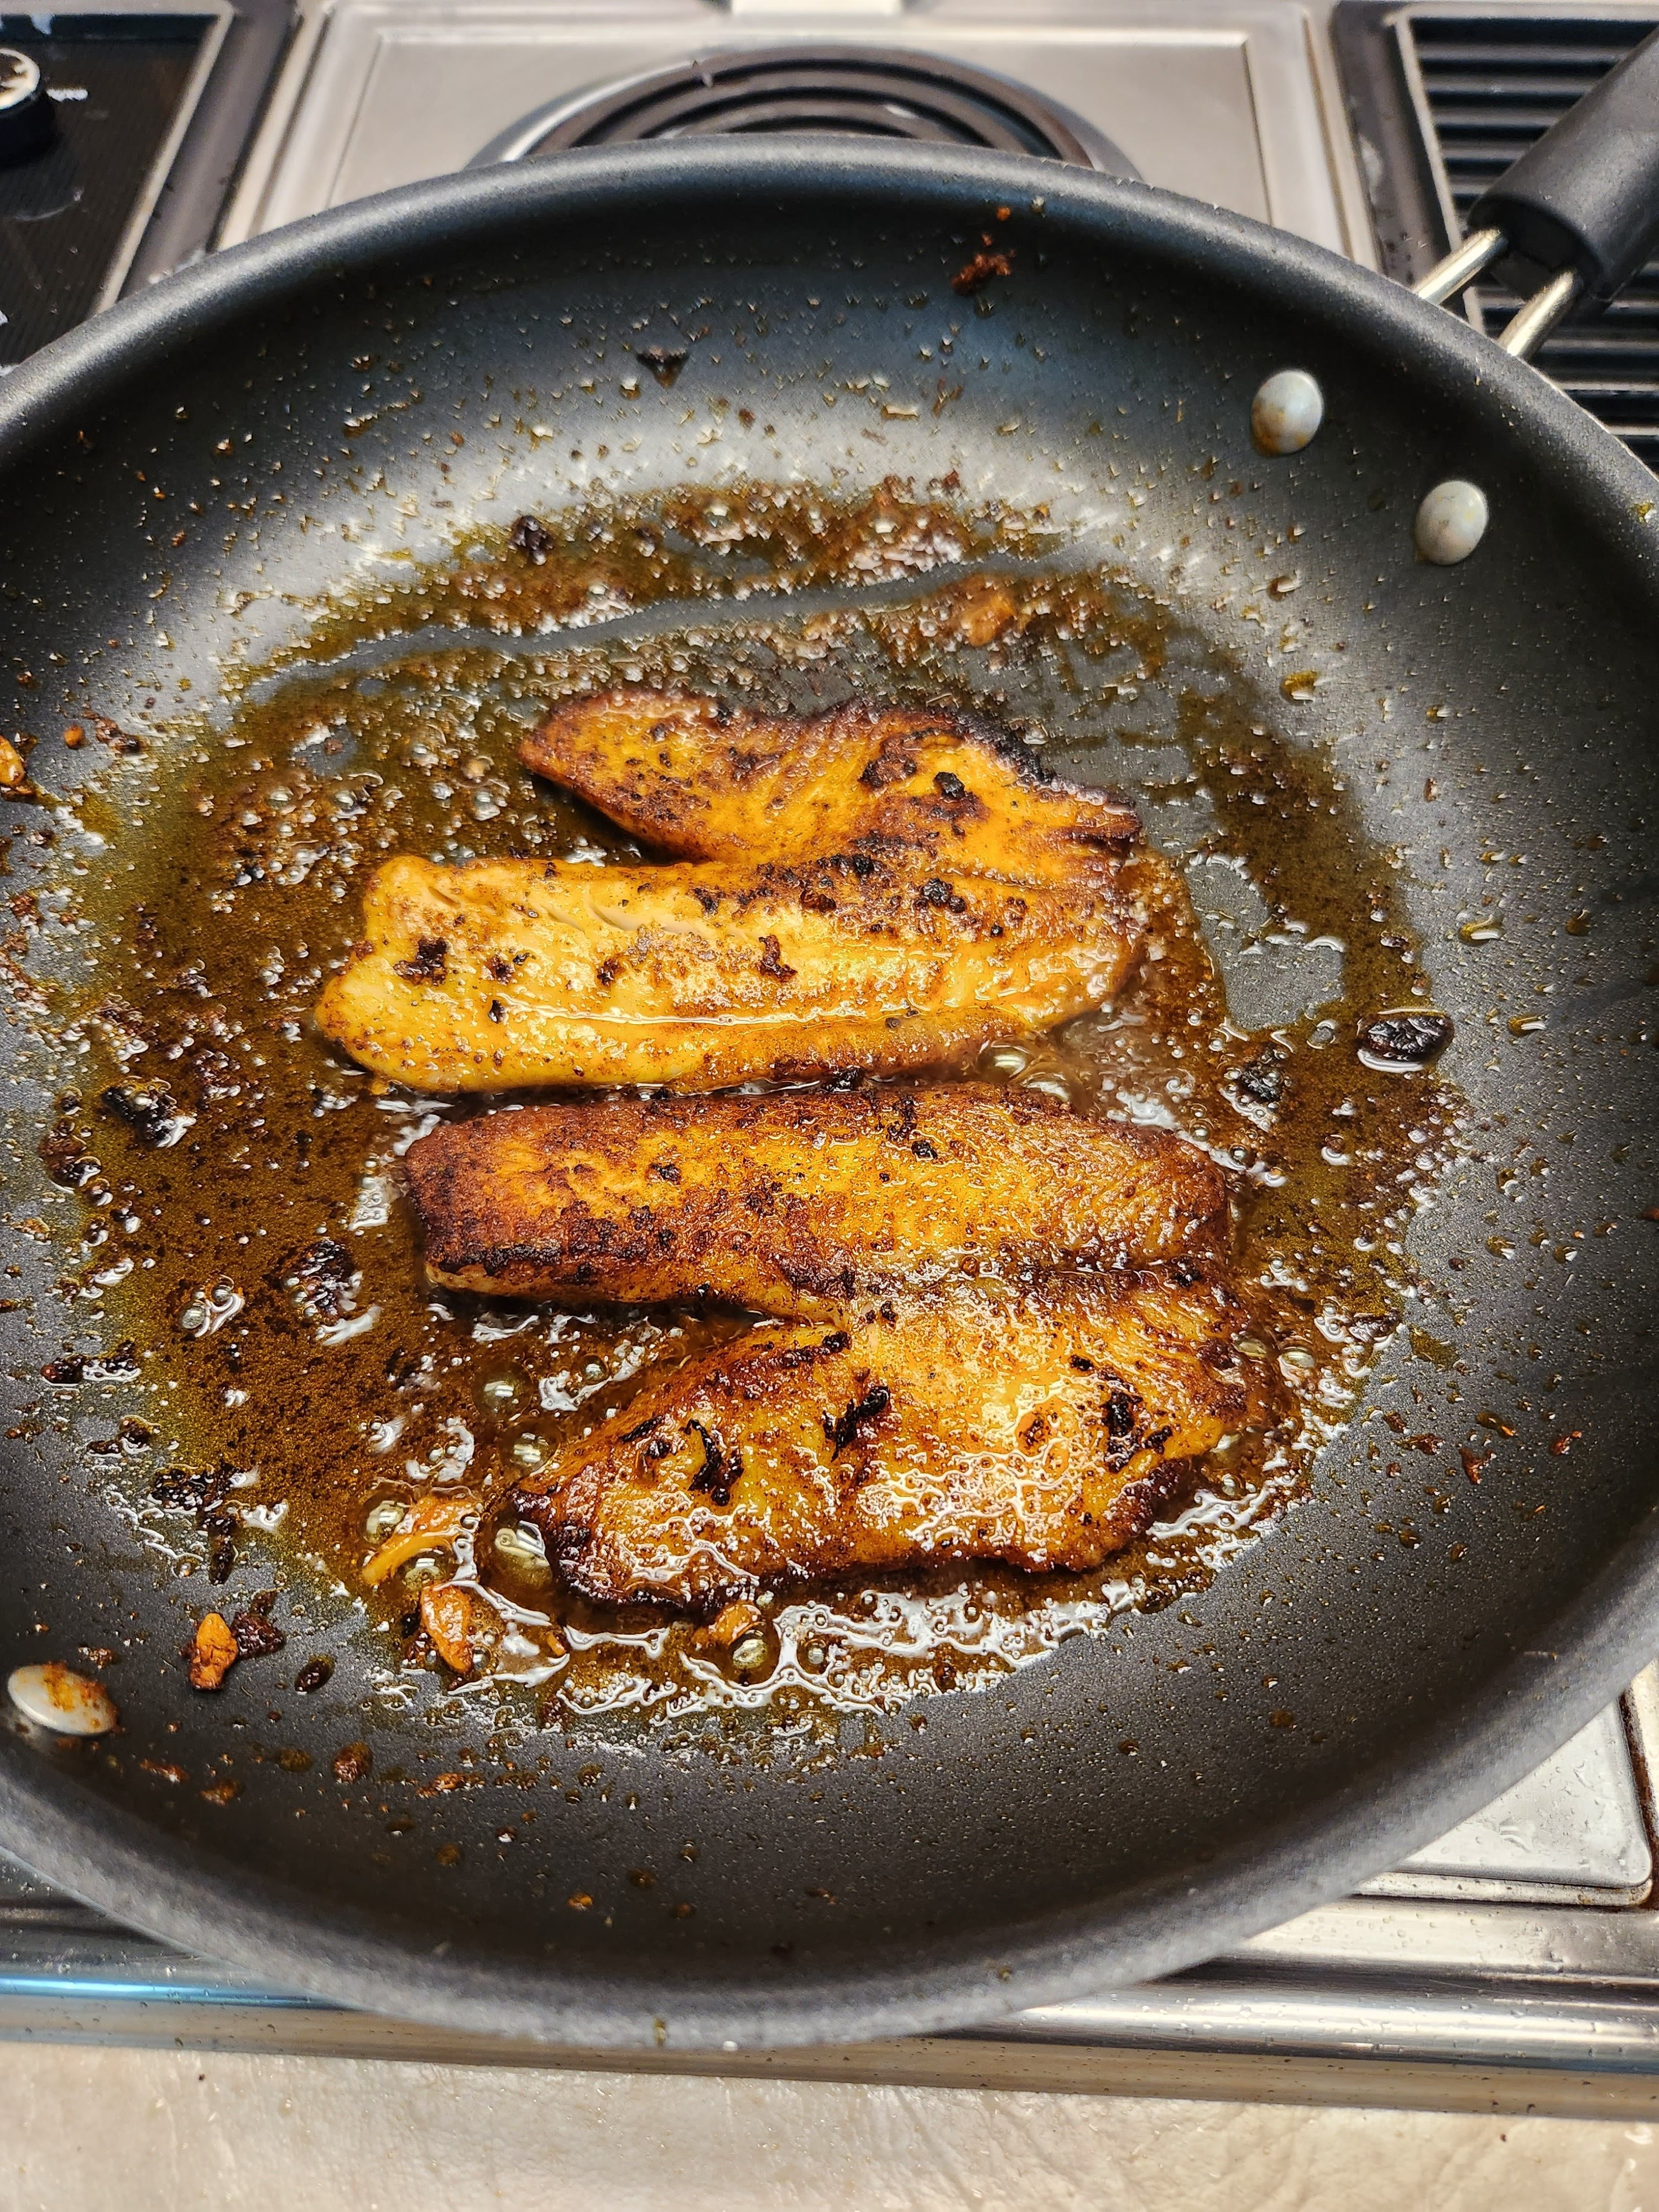 Tilapia filets being fried in a pan